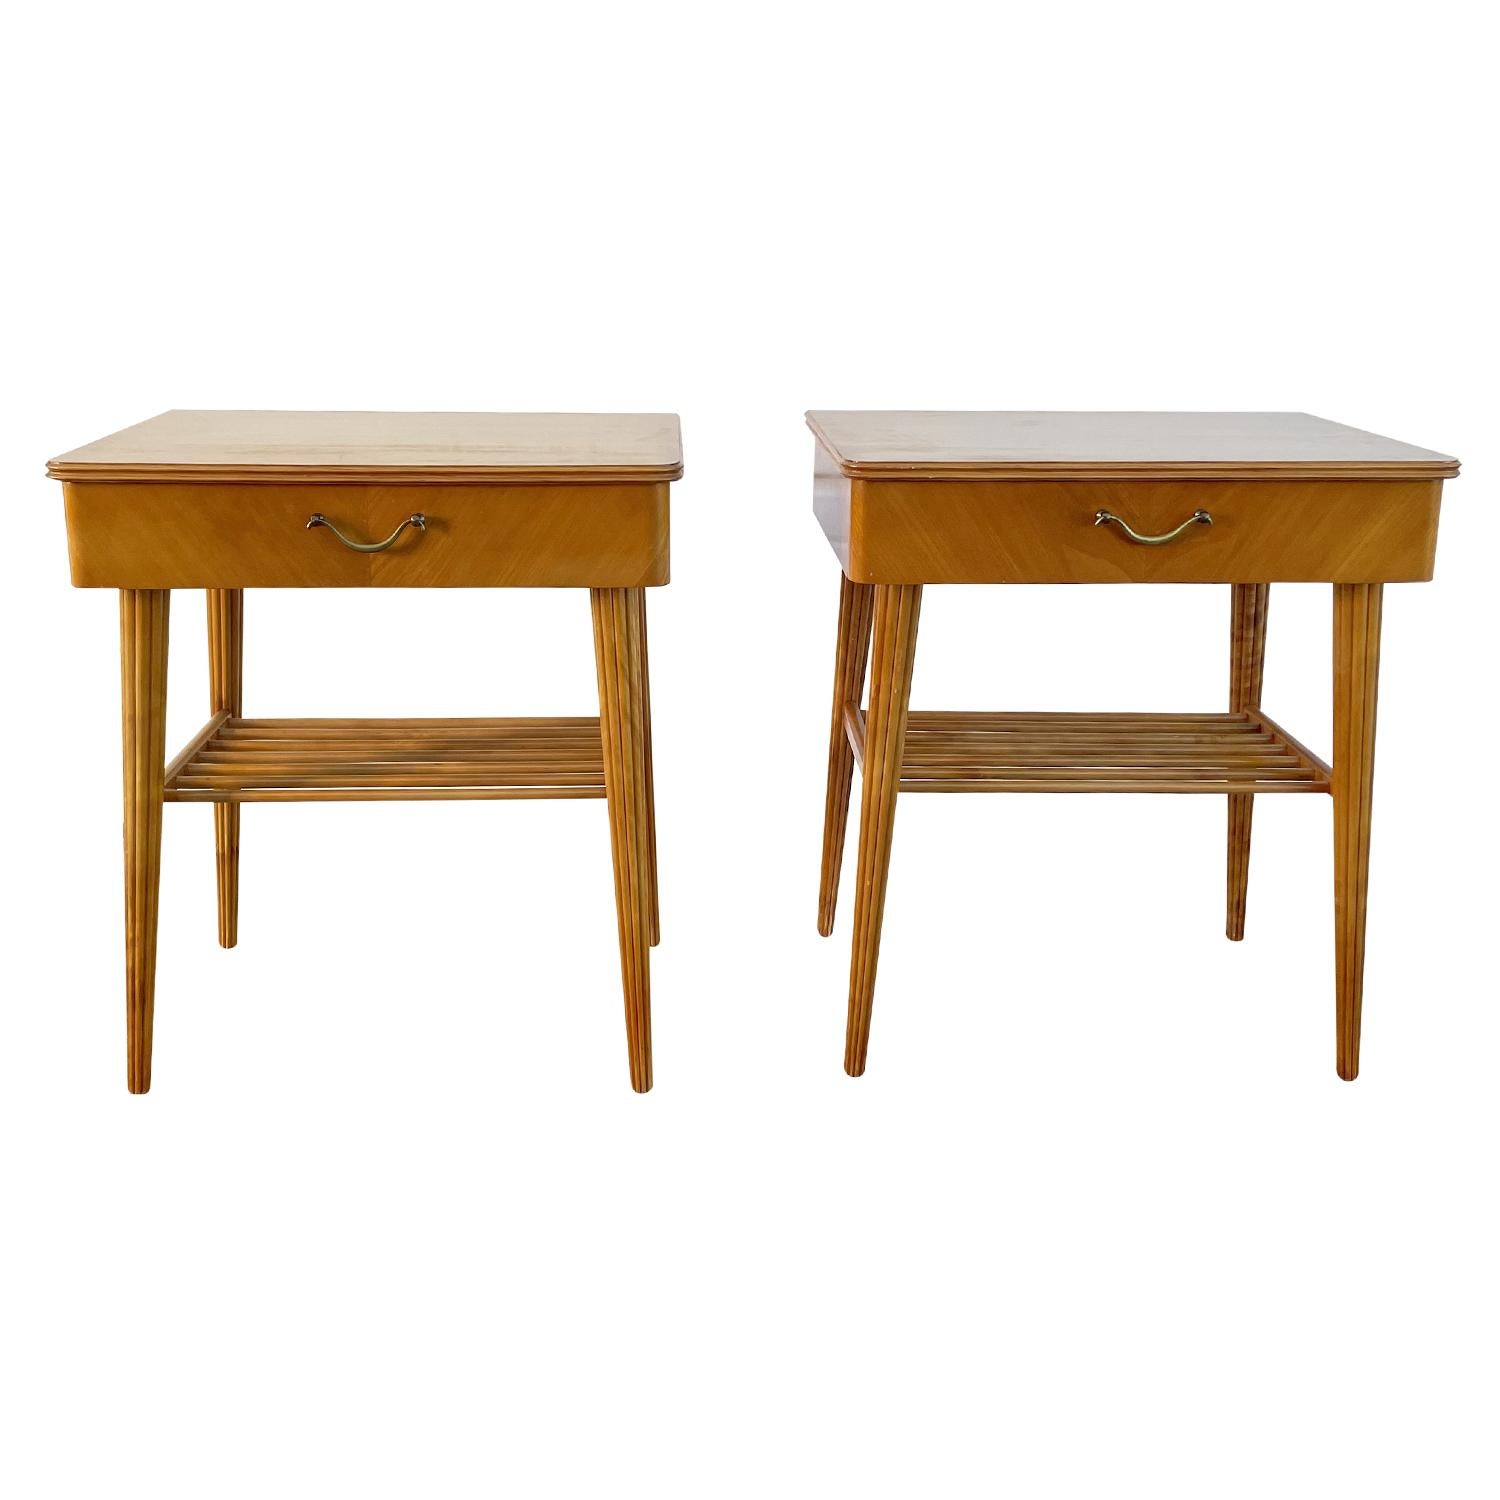 Mid-Century Modern 20th Century Danish Pair of Birchwood Nightstands - Vintage Brass Bedside Tables For Sale